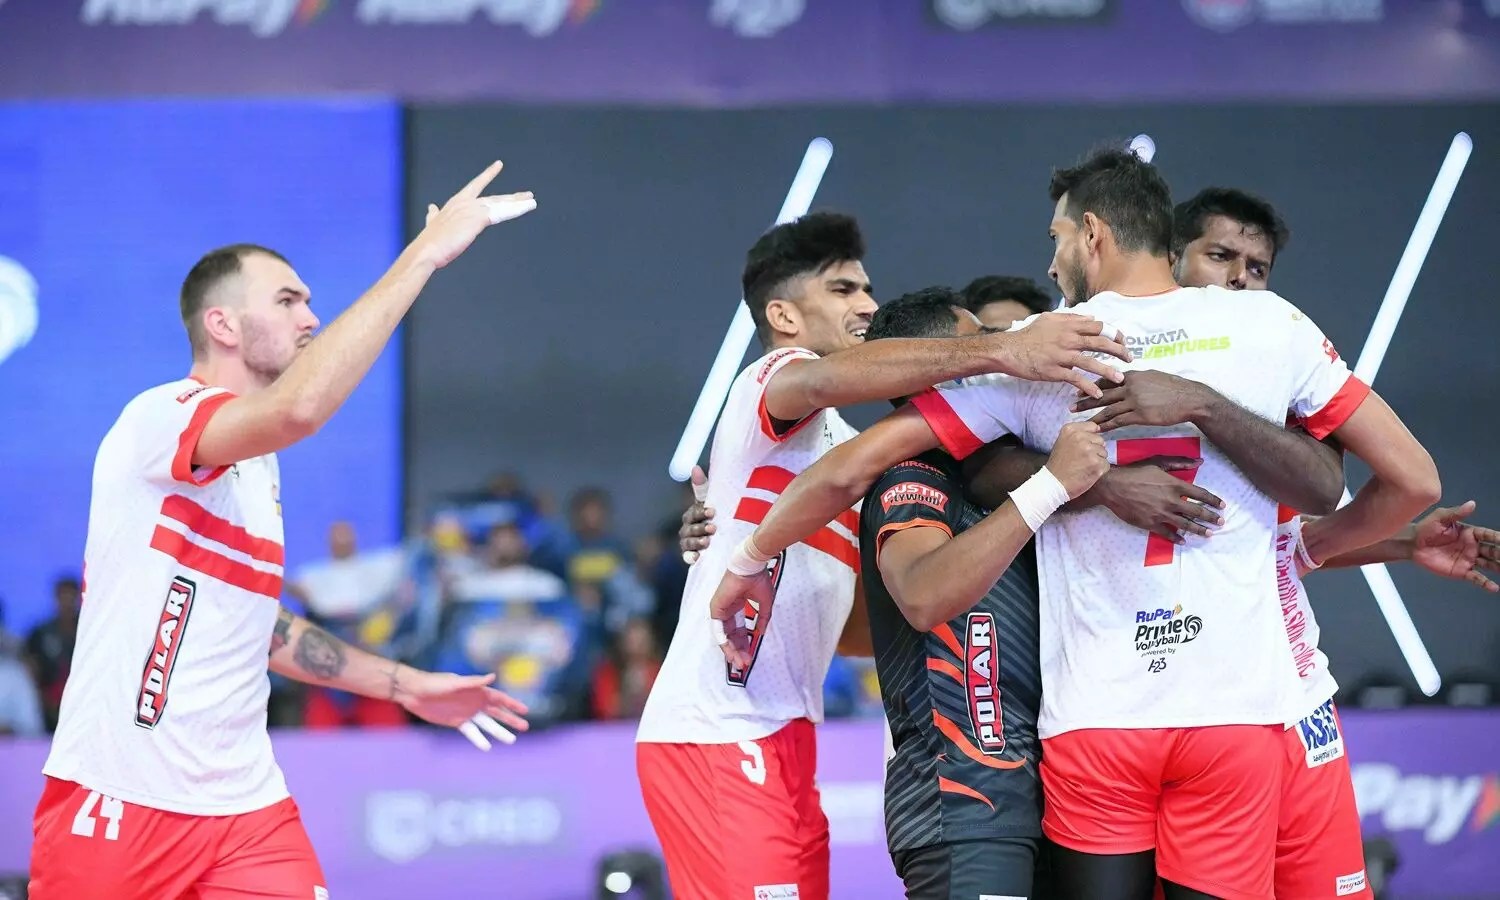 PVL 2023 LIVE: Defending champions Kolkata Thunderbolts to face Bengaluru Torpedoes in Prime Volleyball League Season 2 opener - Follow LIVE updates 